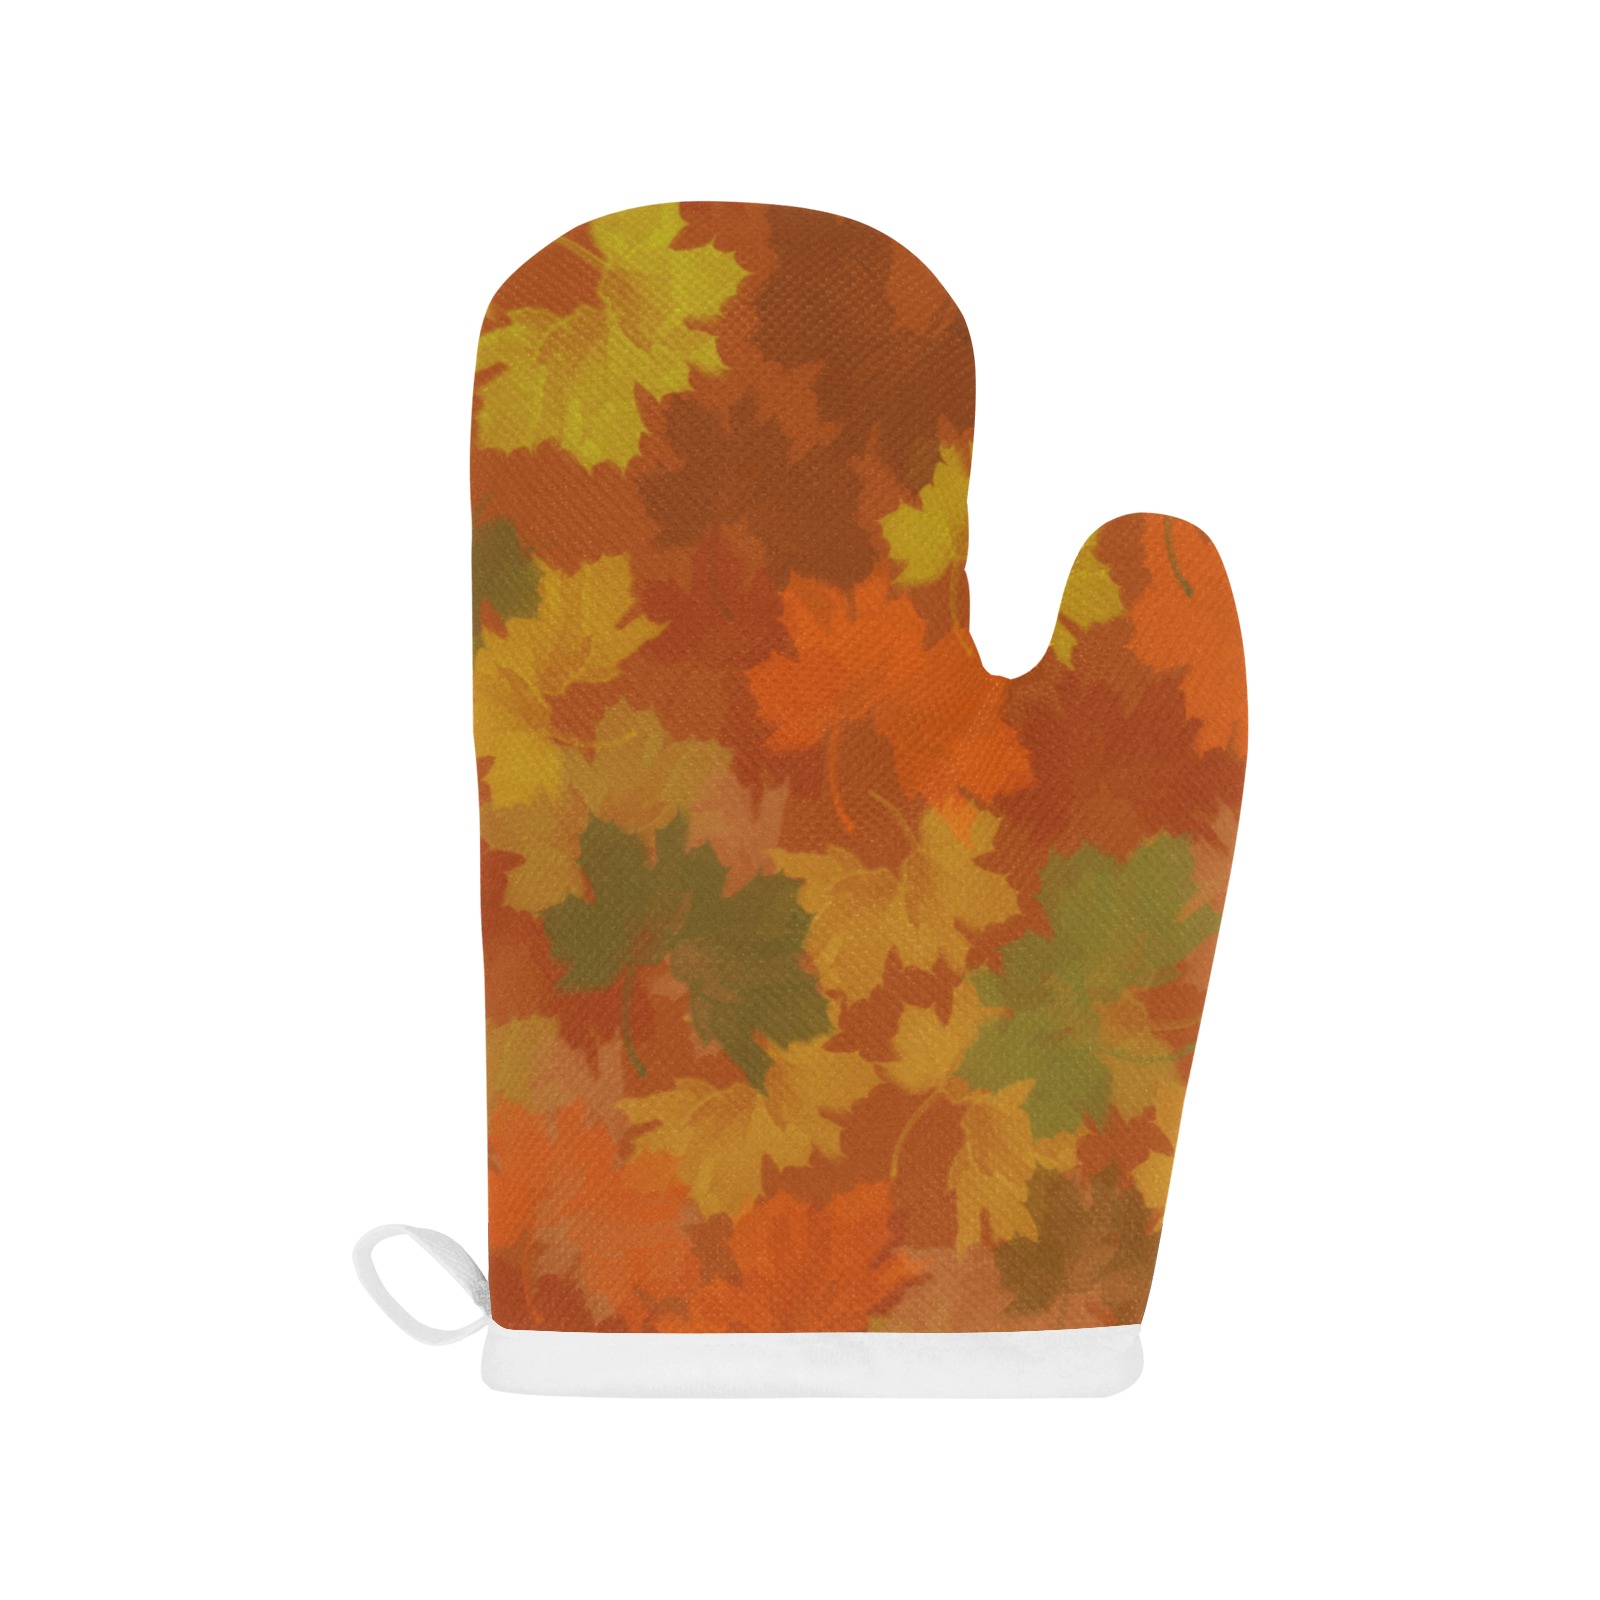 Fall Leaves / Autumn Leaves Linen Oven Mitt (One Piece)